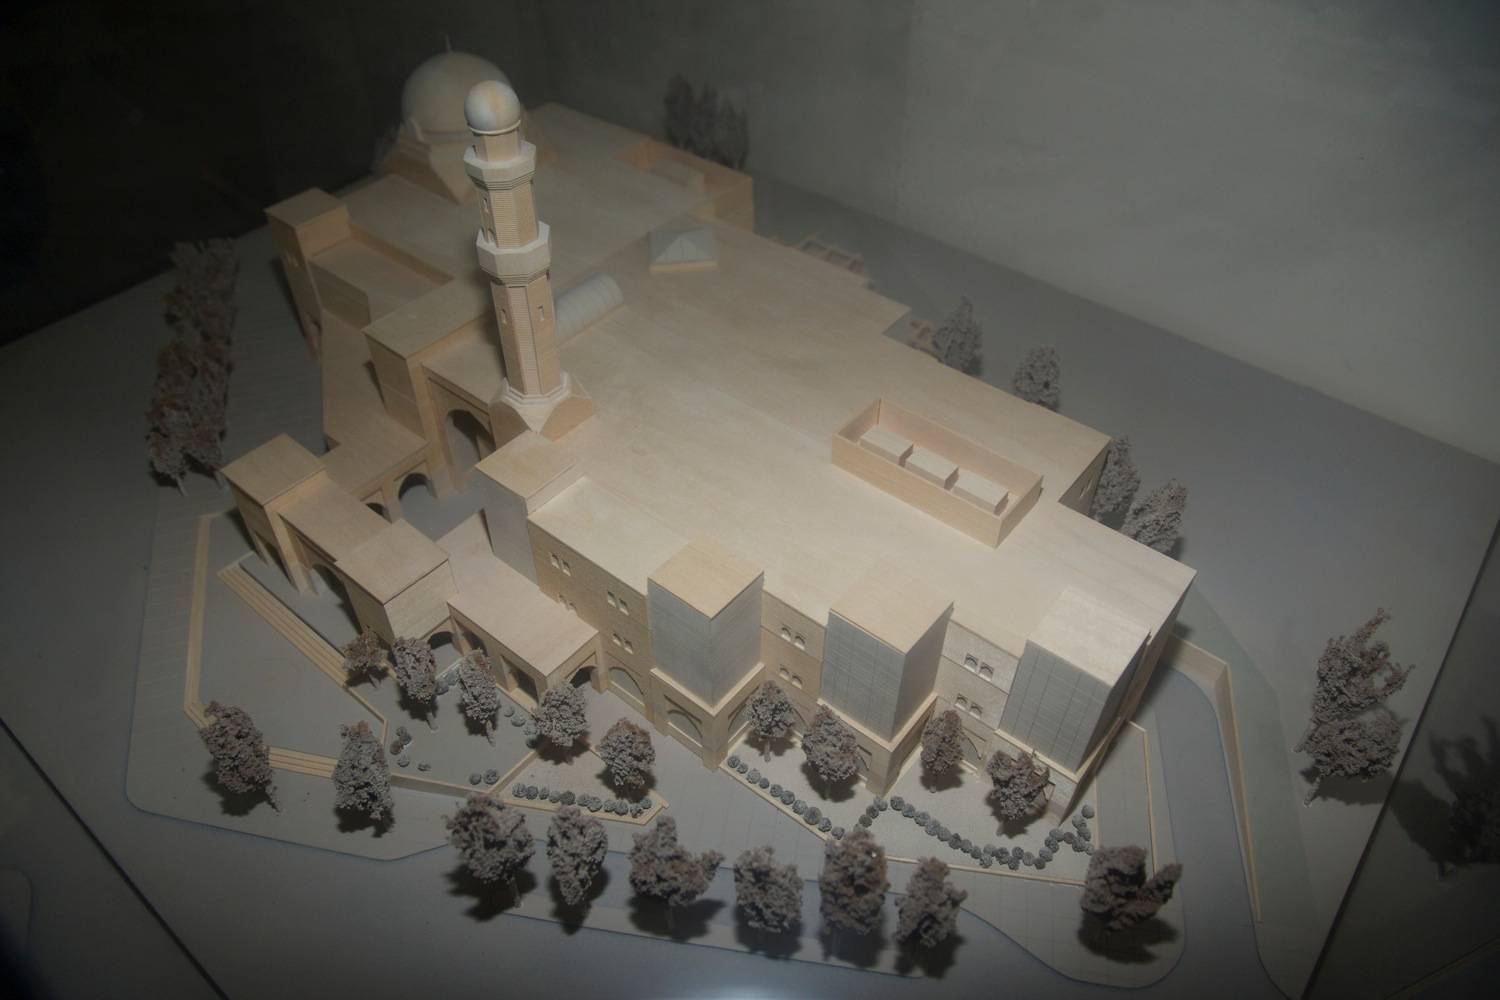 View of the architects model, including the expansion fo the school, Malcolm X Blvd. facade